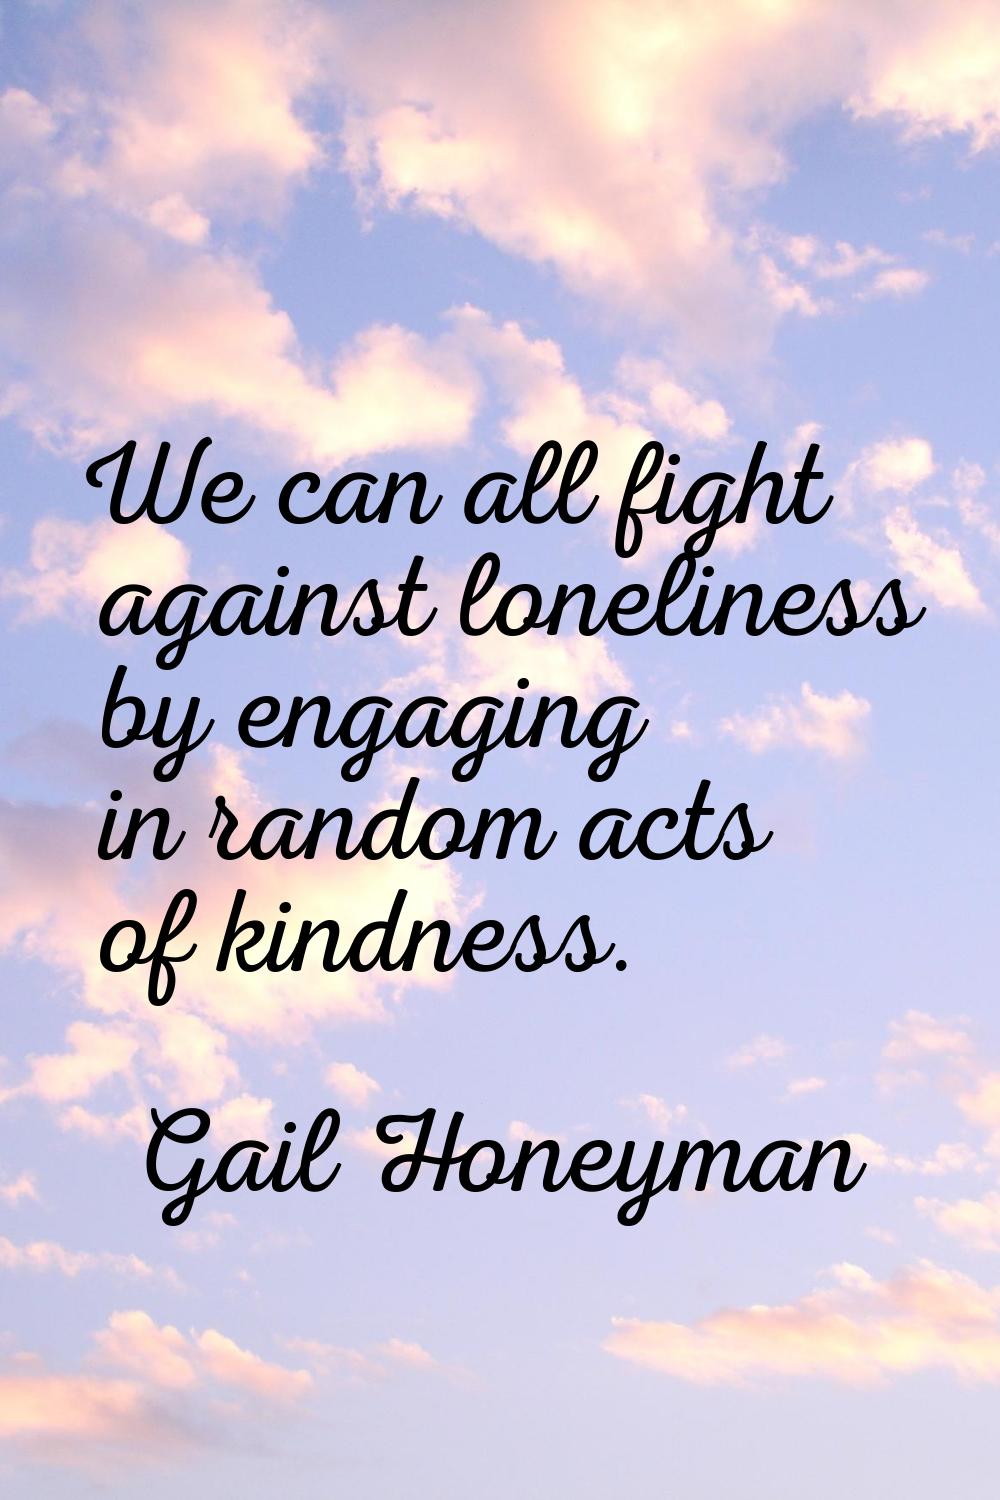 We can all fight against loneliness by engaging in random acts of kindness.